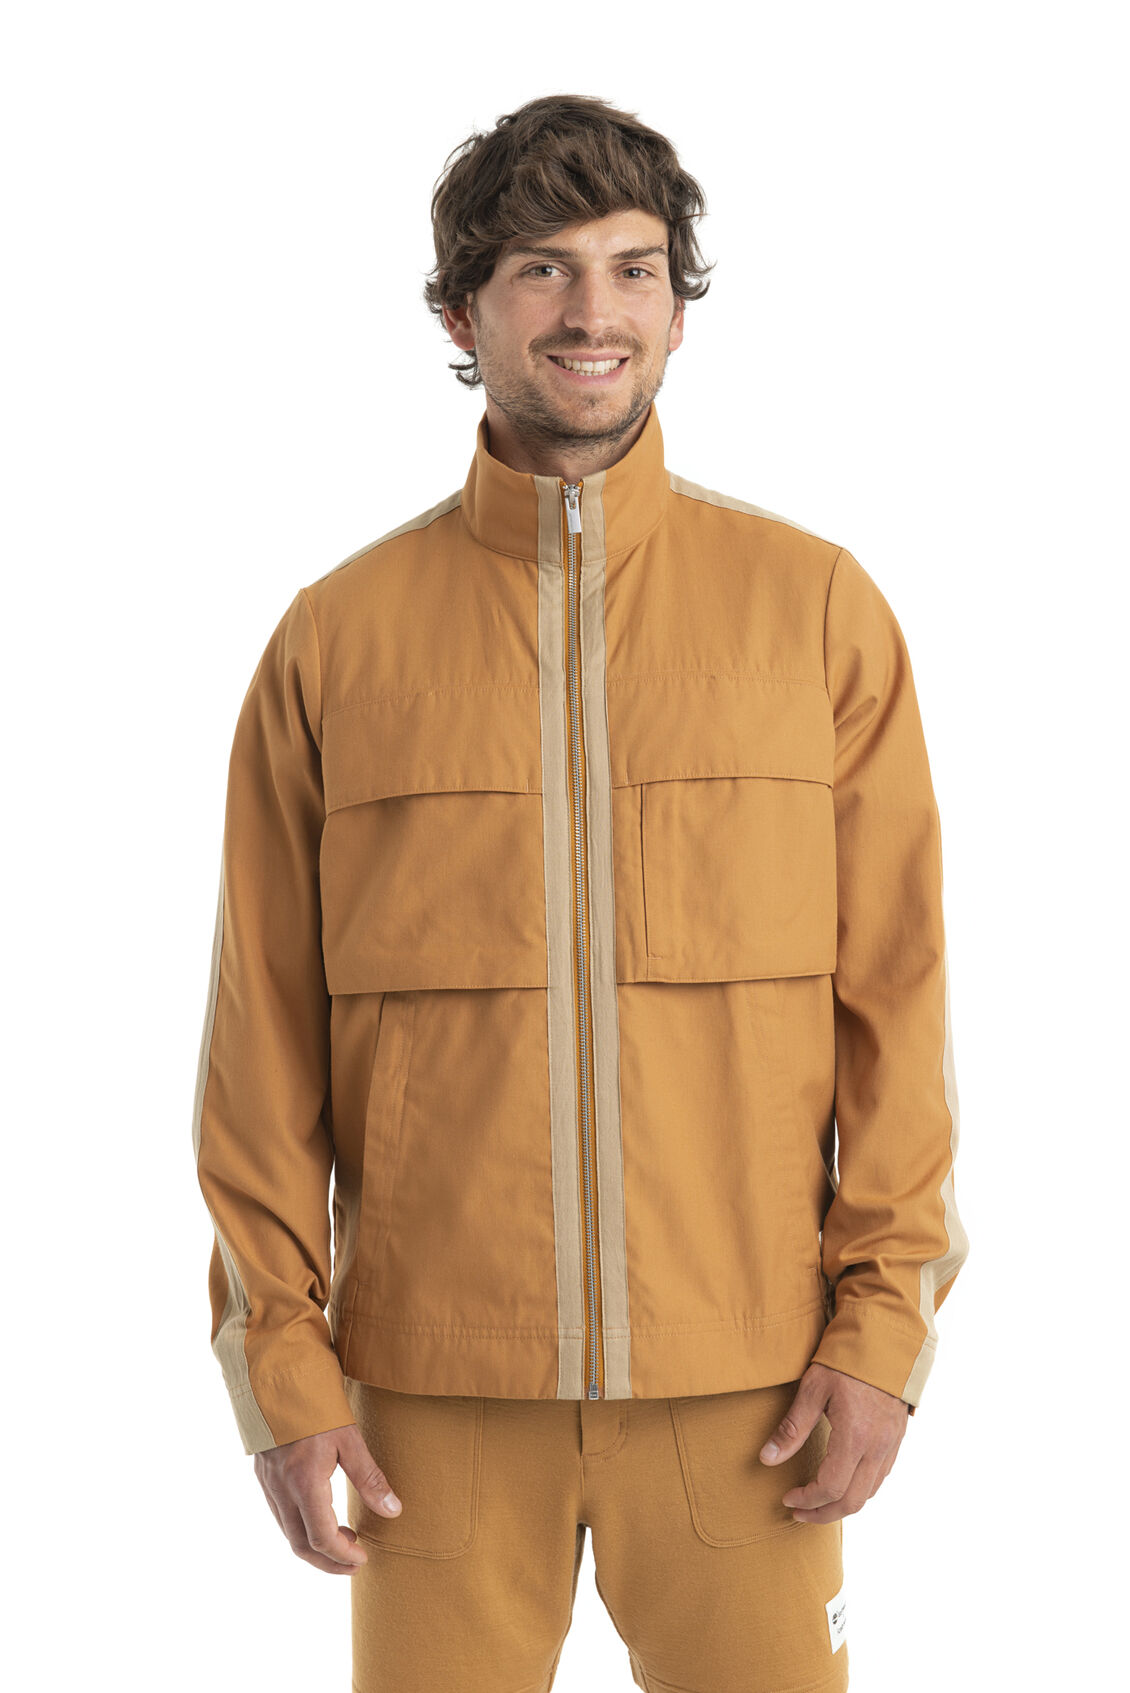 Mens Timberland x icebreaker Merino Cotton Jacket Designed in collaboration with Timberland, the Timberland x icebreaker Merino Cotton Jacket is a lightweight summer layer that combines natural performance with rugged heritage style.